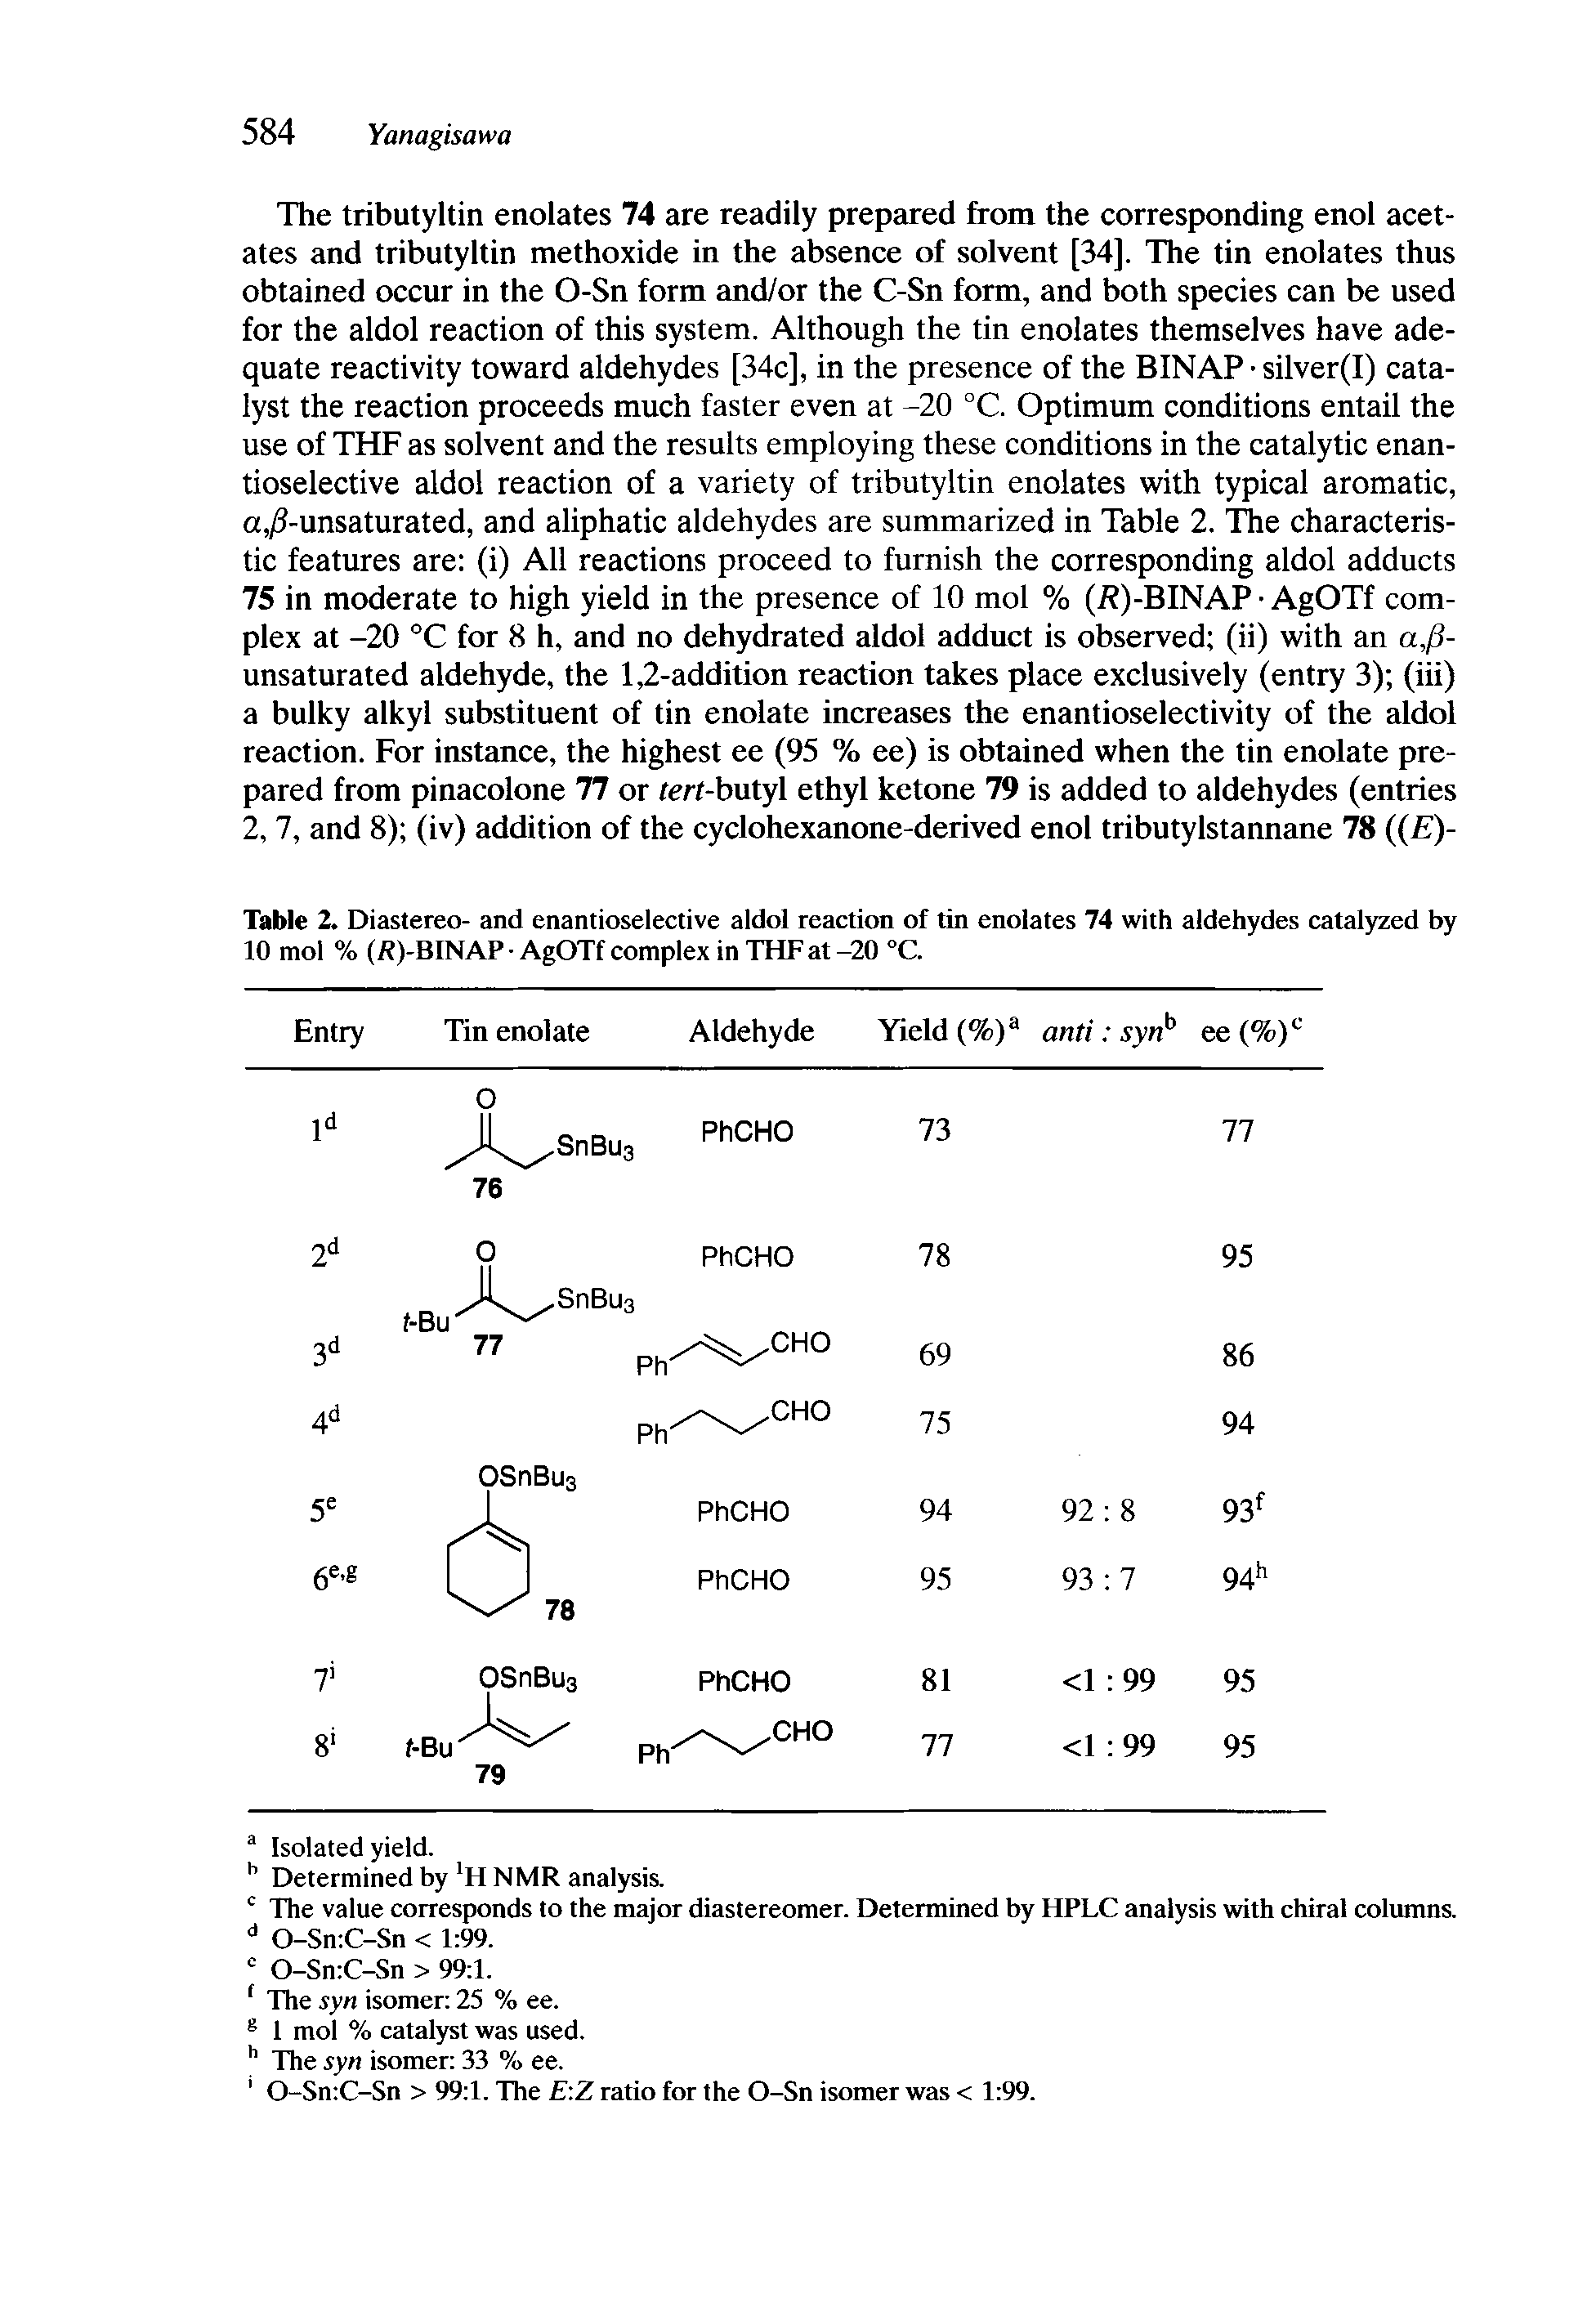 Table 2. Diastereo- and enantioselective aldol reaction of tin enolates 74 with aldehydes catalyzed by 10 mol % (/ )-BINAP AgOTf complex in THF at -20 °C.